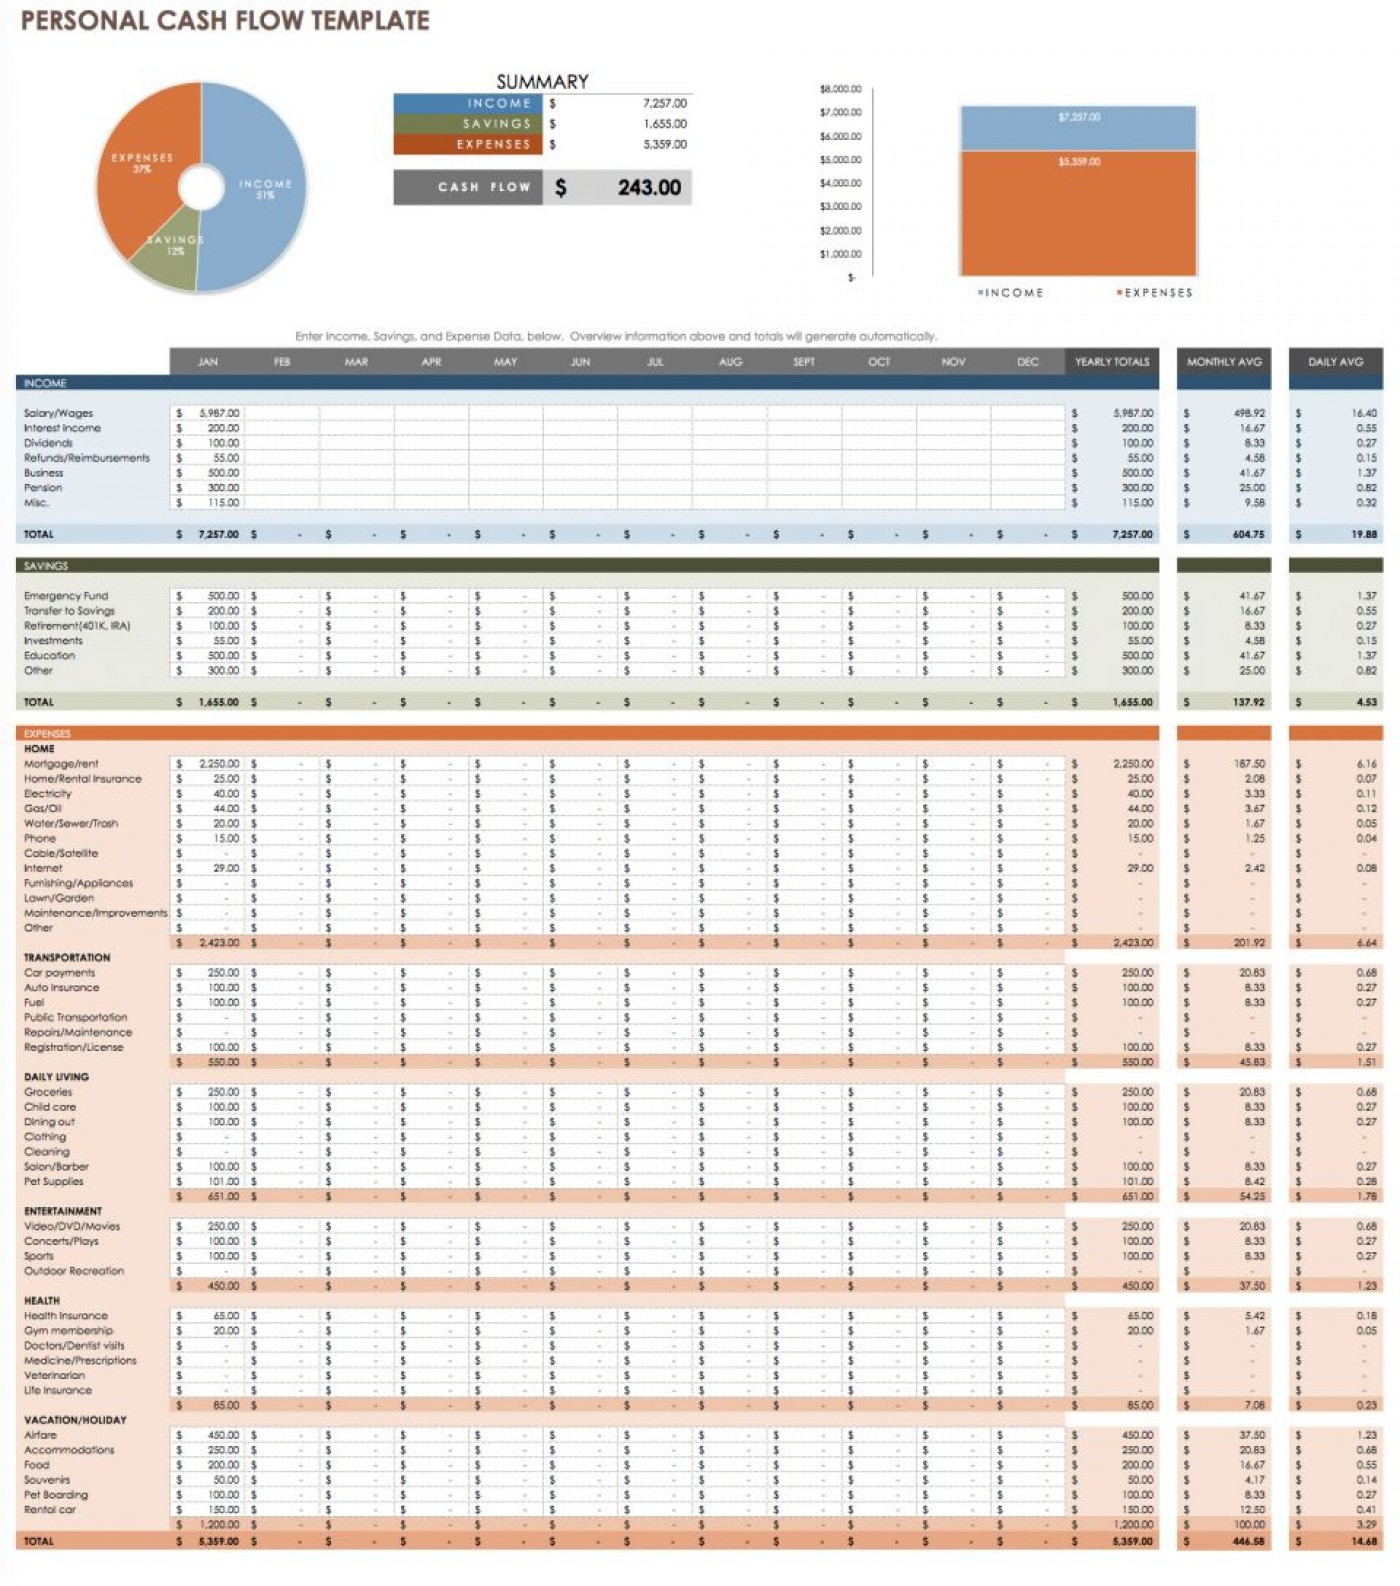 Personal Cash Flow Spreadsheet Template Free With 003 Ic Personal Cash Flow Templateitokygedqizp Excel Template